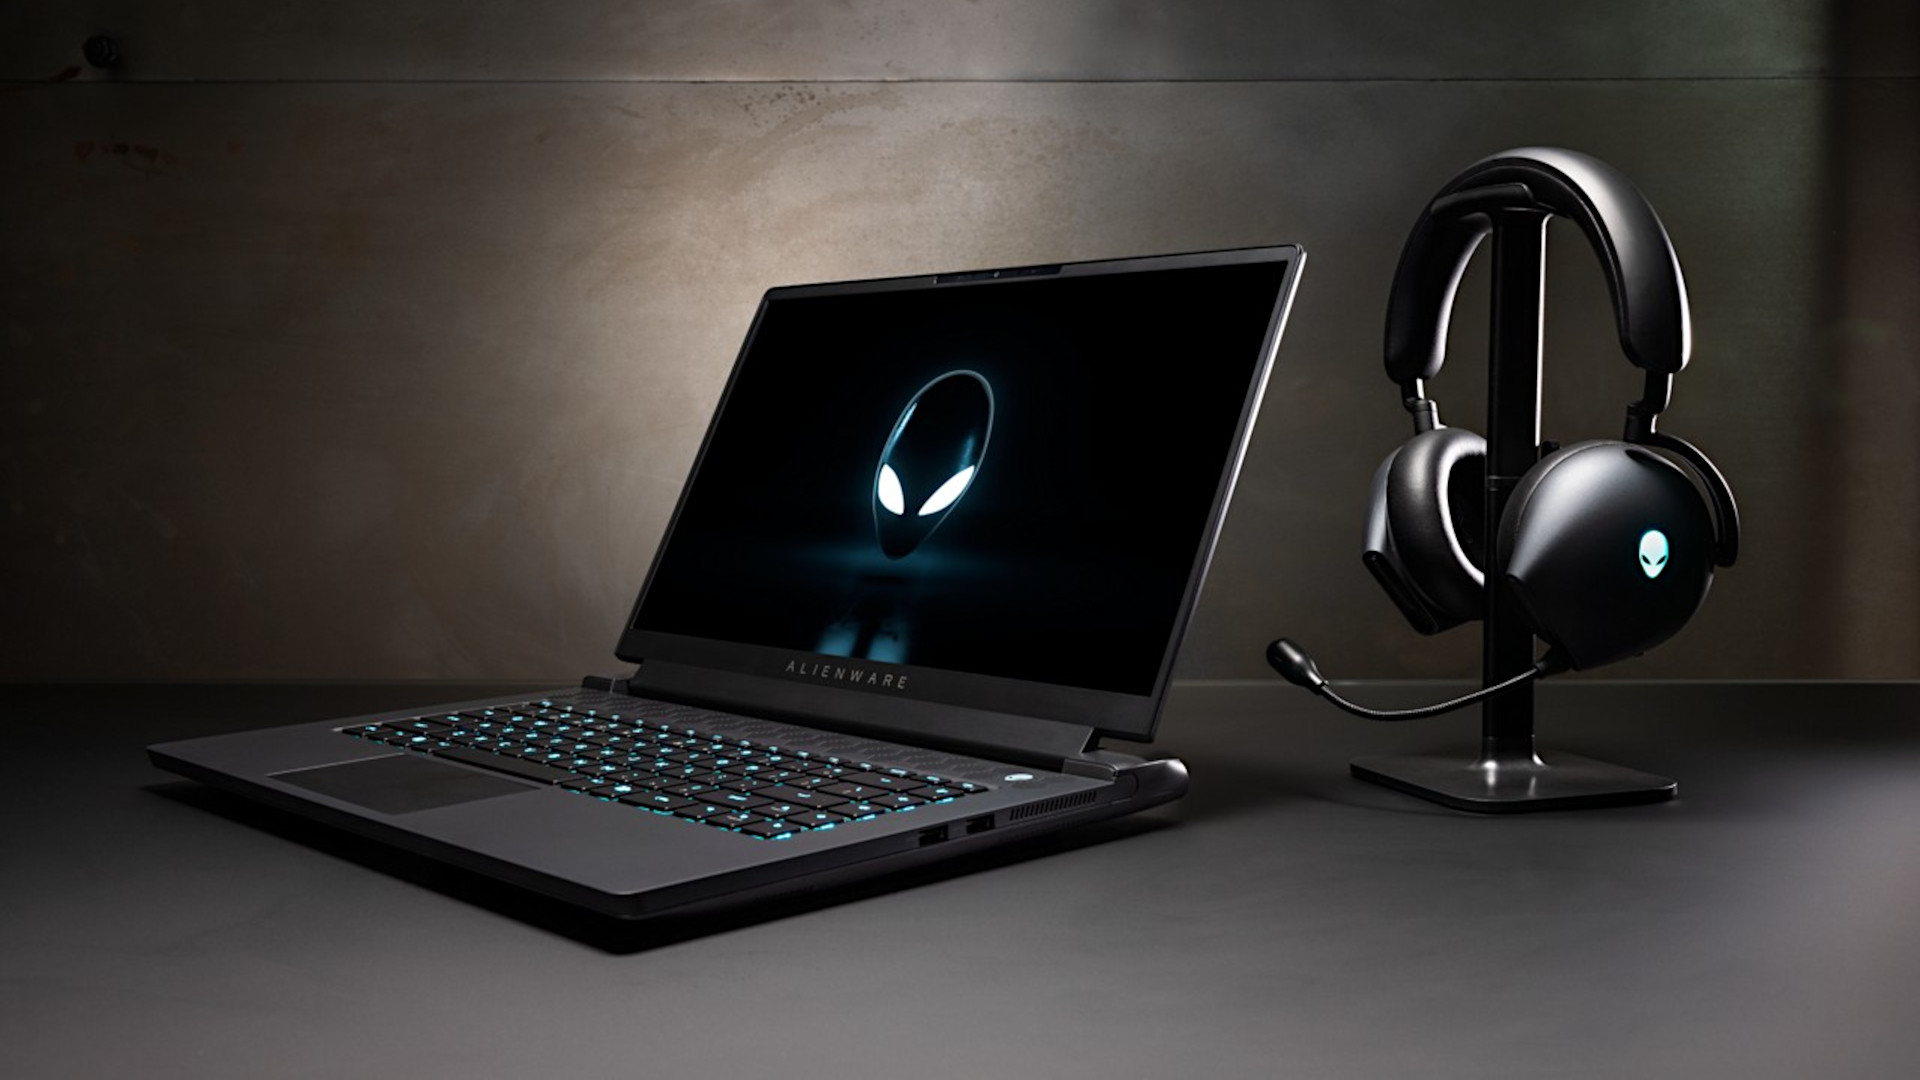 Alienware launches two new gaming laptops with 480Hz displays